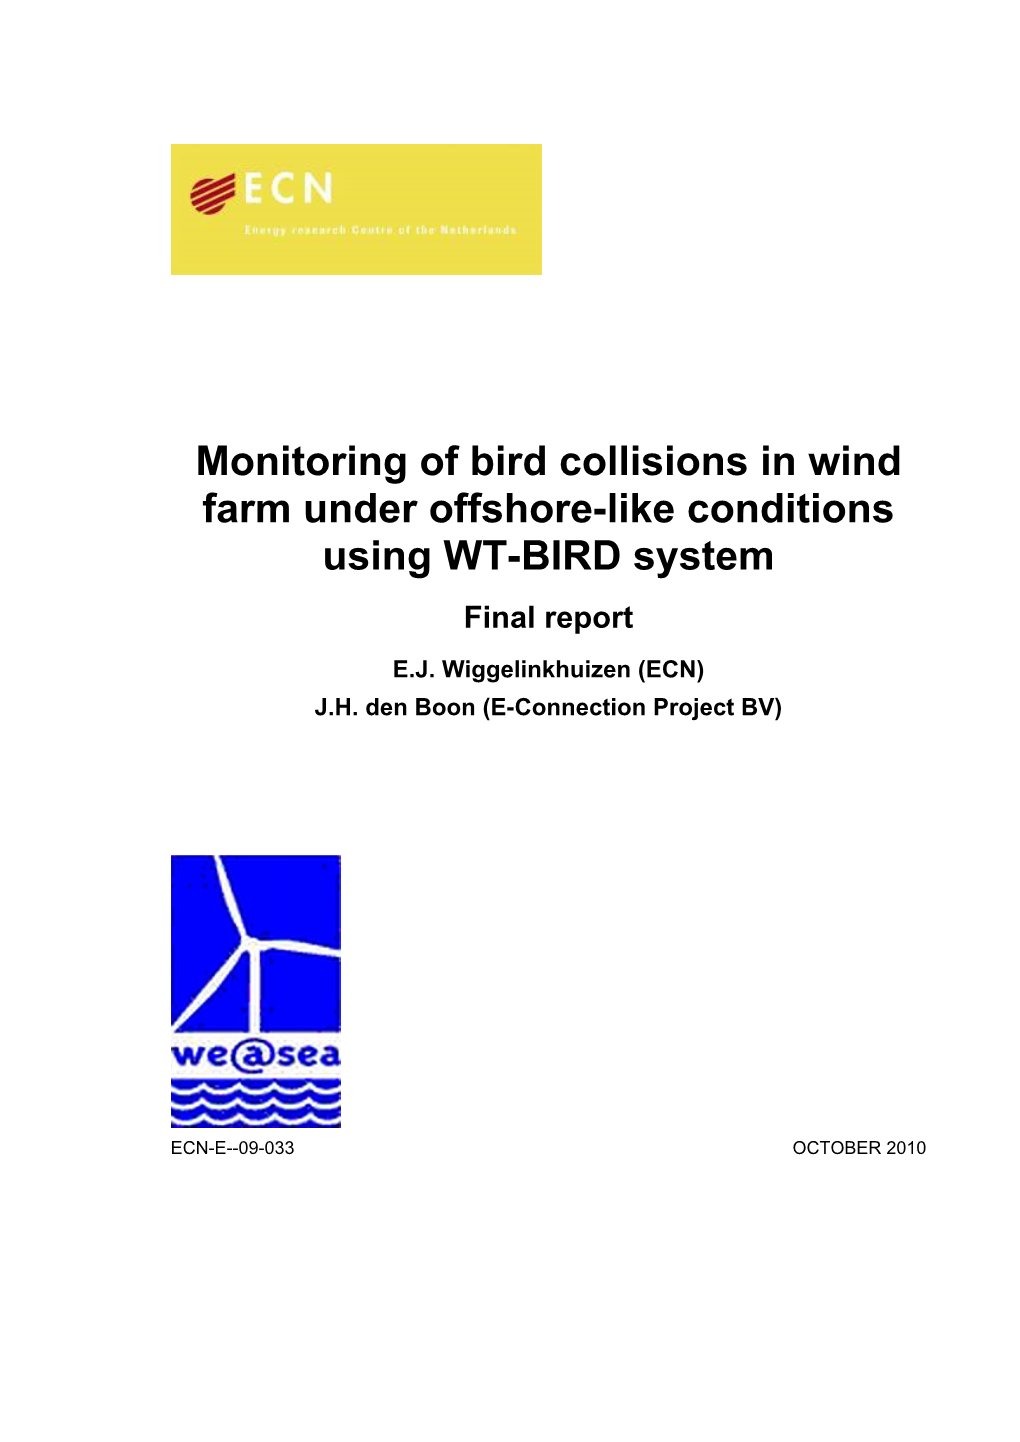 Monitoring of Bird Collisions in Wind Farm Under Offshore-Like Conditions Using WT-BIRD System Final Report